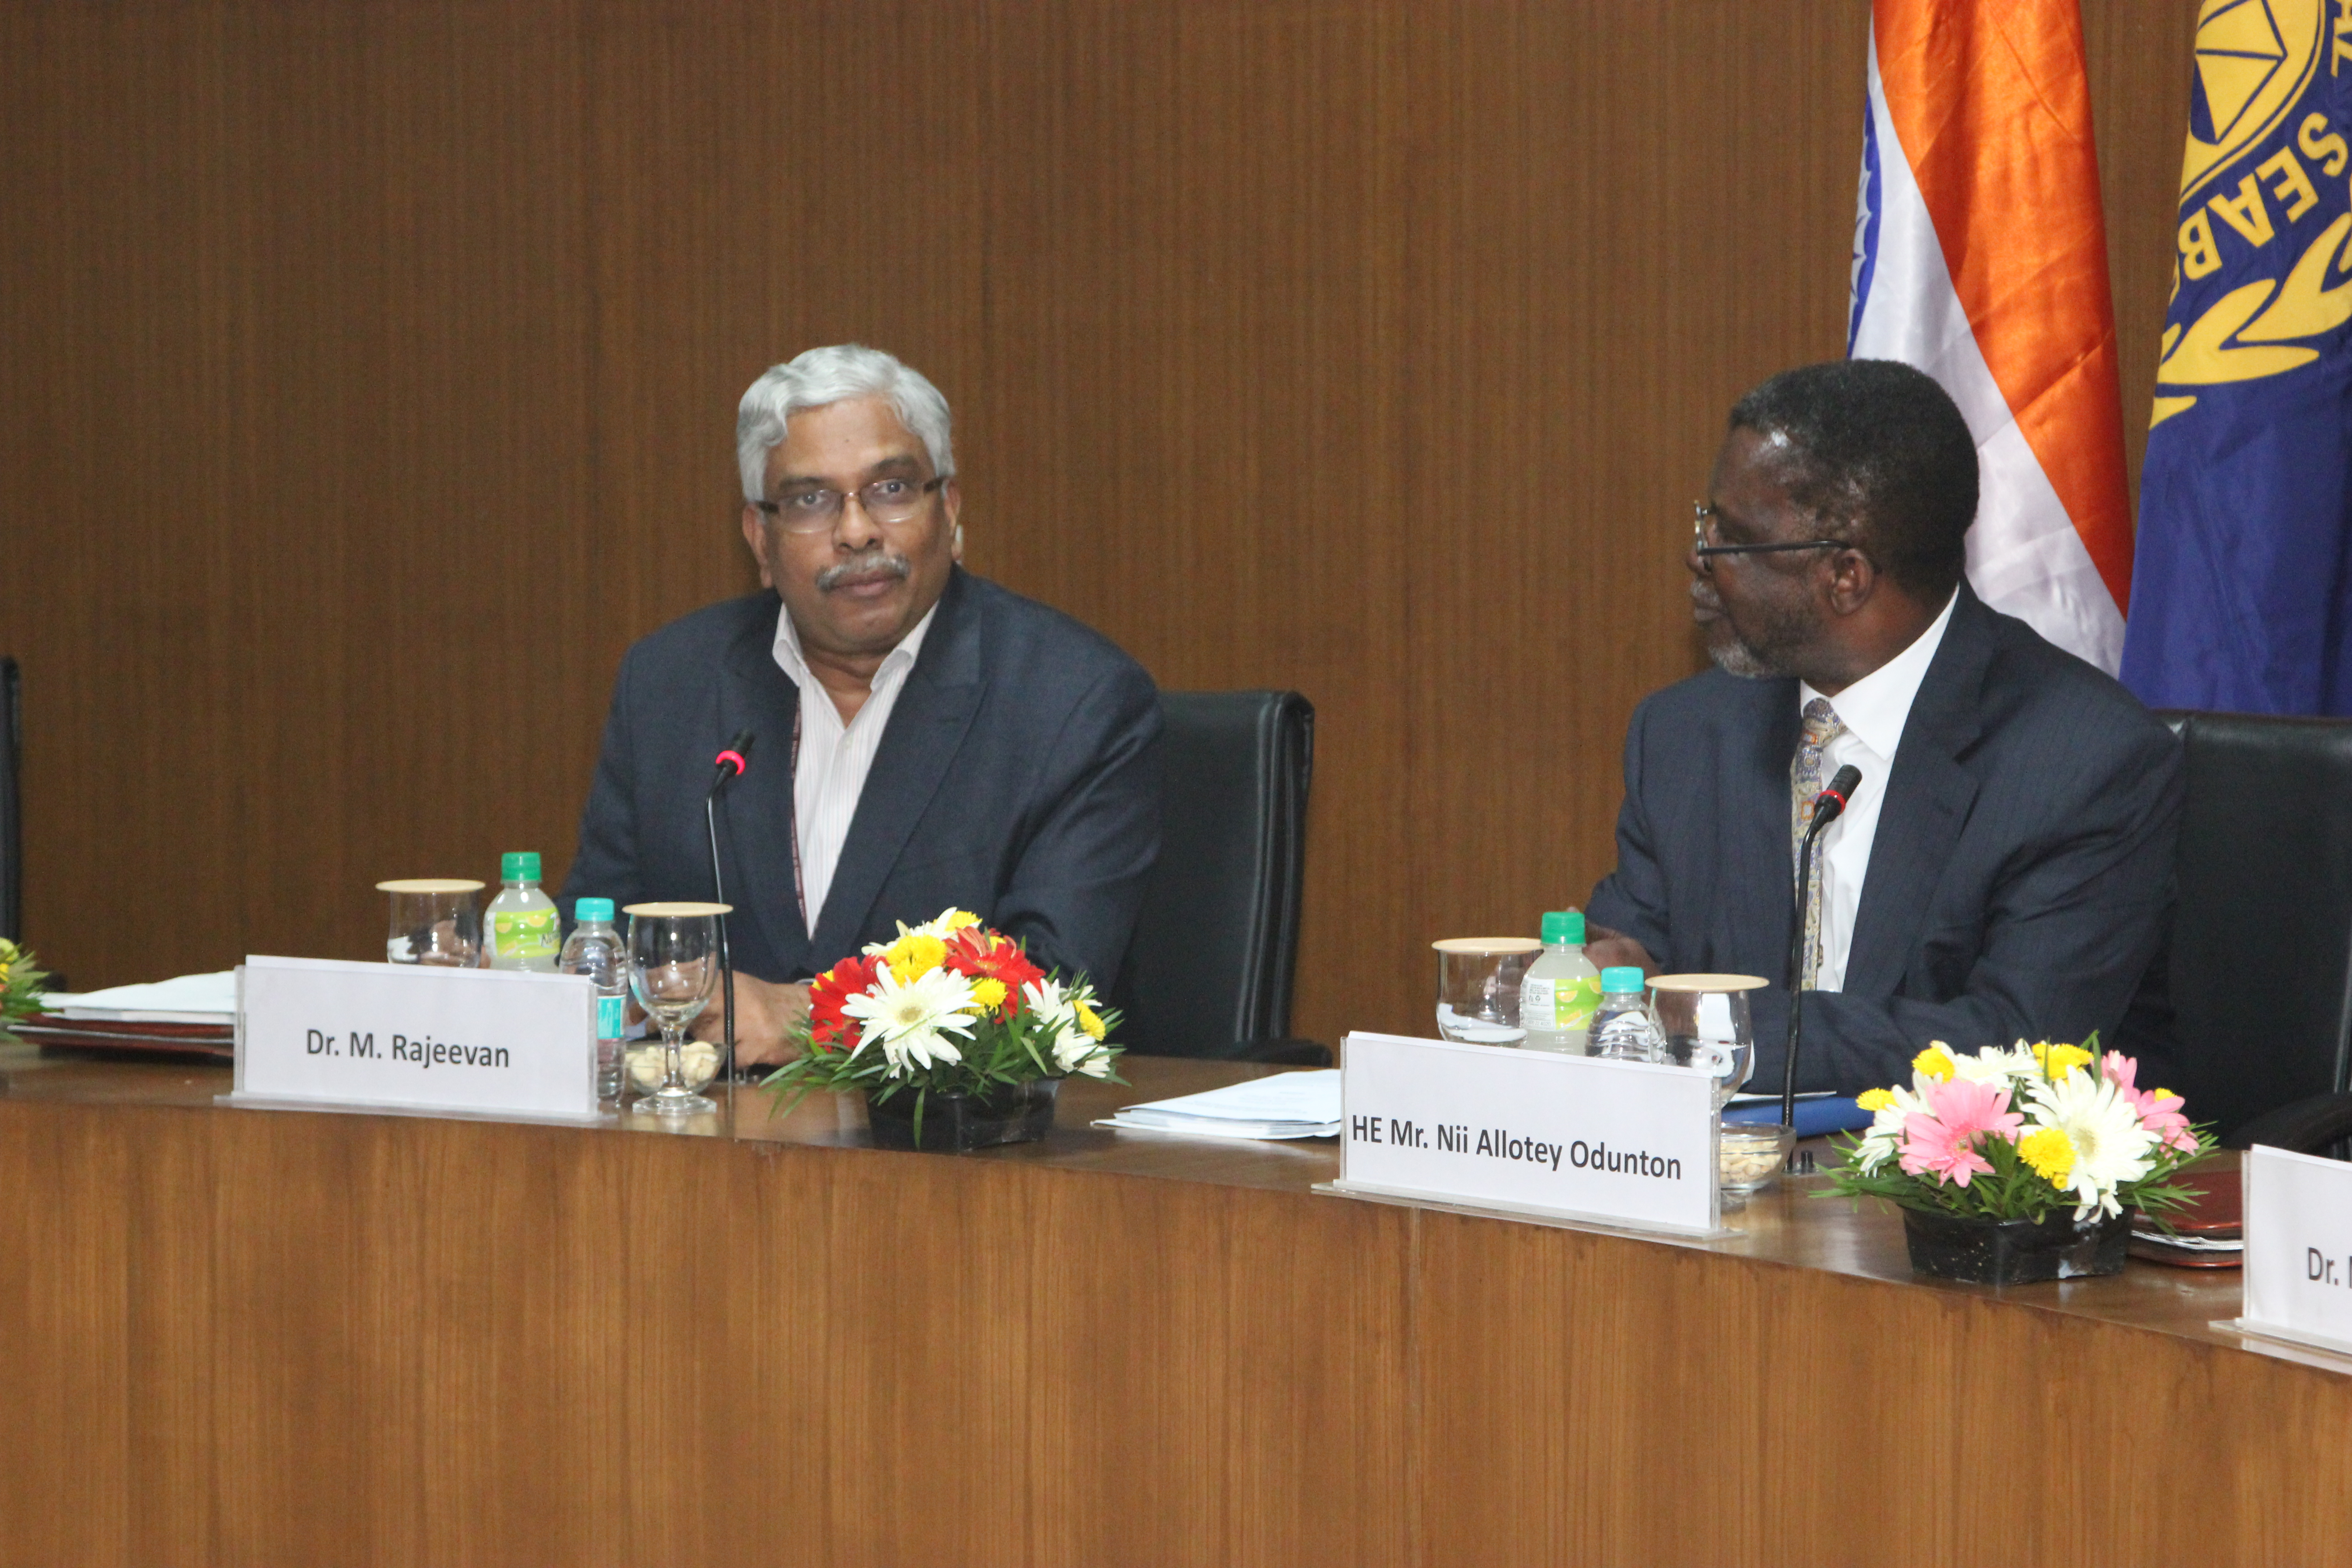 Signing of Contract for Exploration of Polymetallic Sulphides between GOI and ISBA